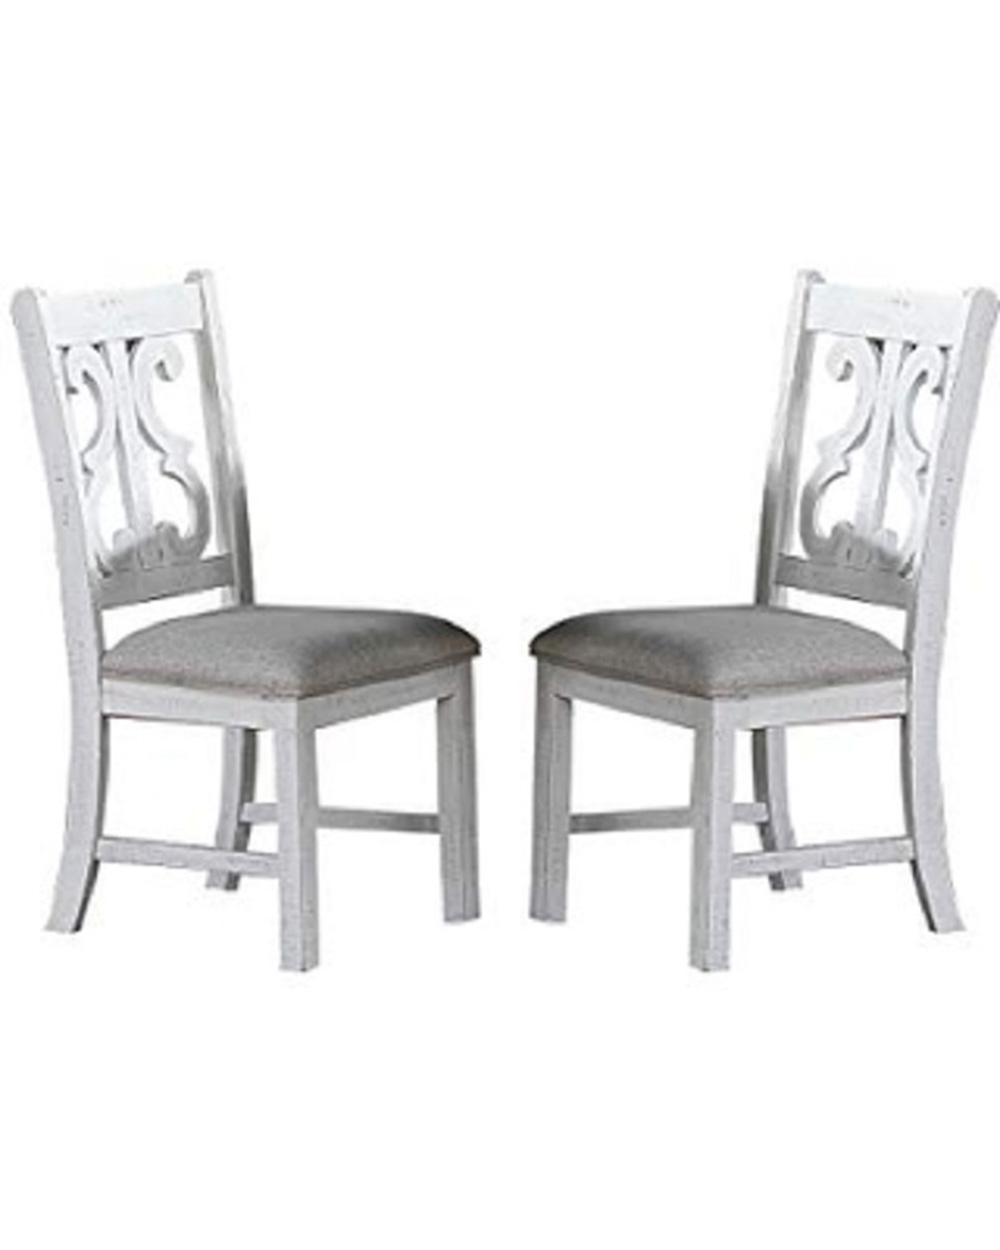 Upholstered Dining Chair Set of 2, with Backrest, and Wooden Legs, for Restaurant, Cafe, Tavern, Office, Living Room - White